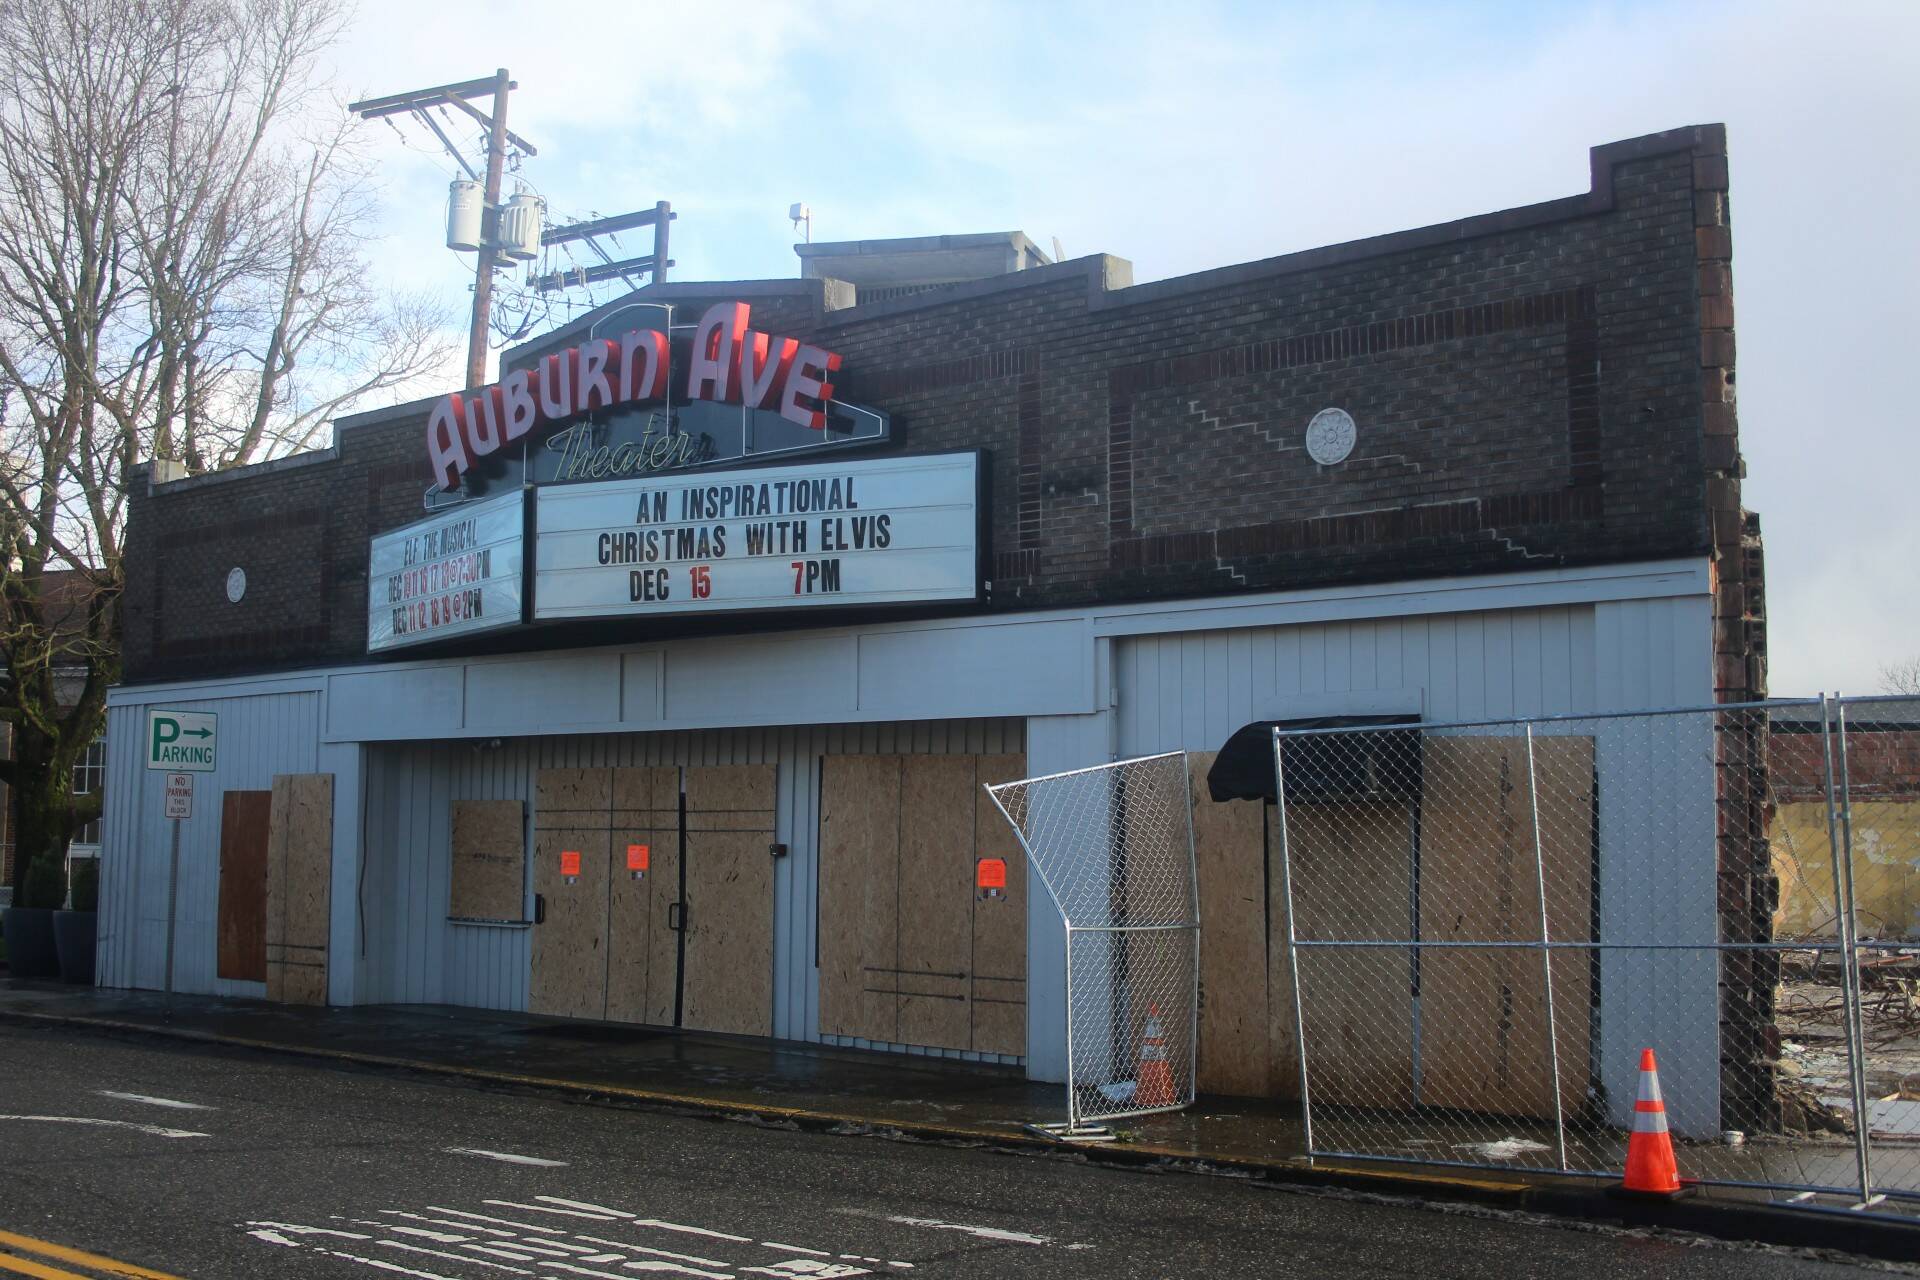 The Auburn Avenue Theater sits vacant and boarded up on Jan. 3, 2022, after being condemned due to safety concerns stemming from the demolition of the Max House Apartment complex next door. Photo by Henry Stewart-Wood/Sound Publishing